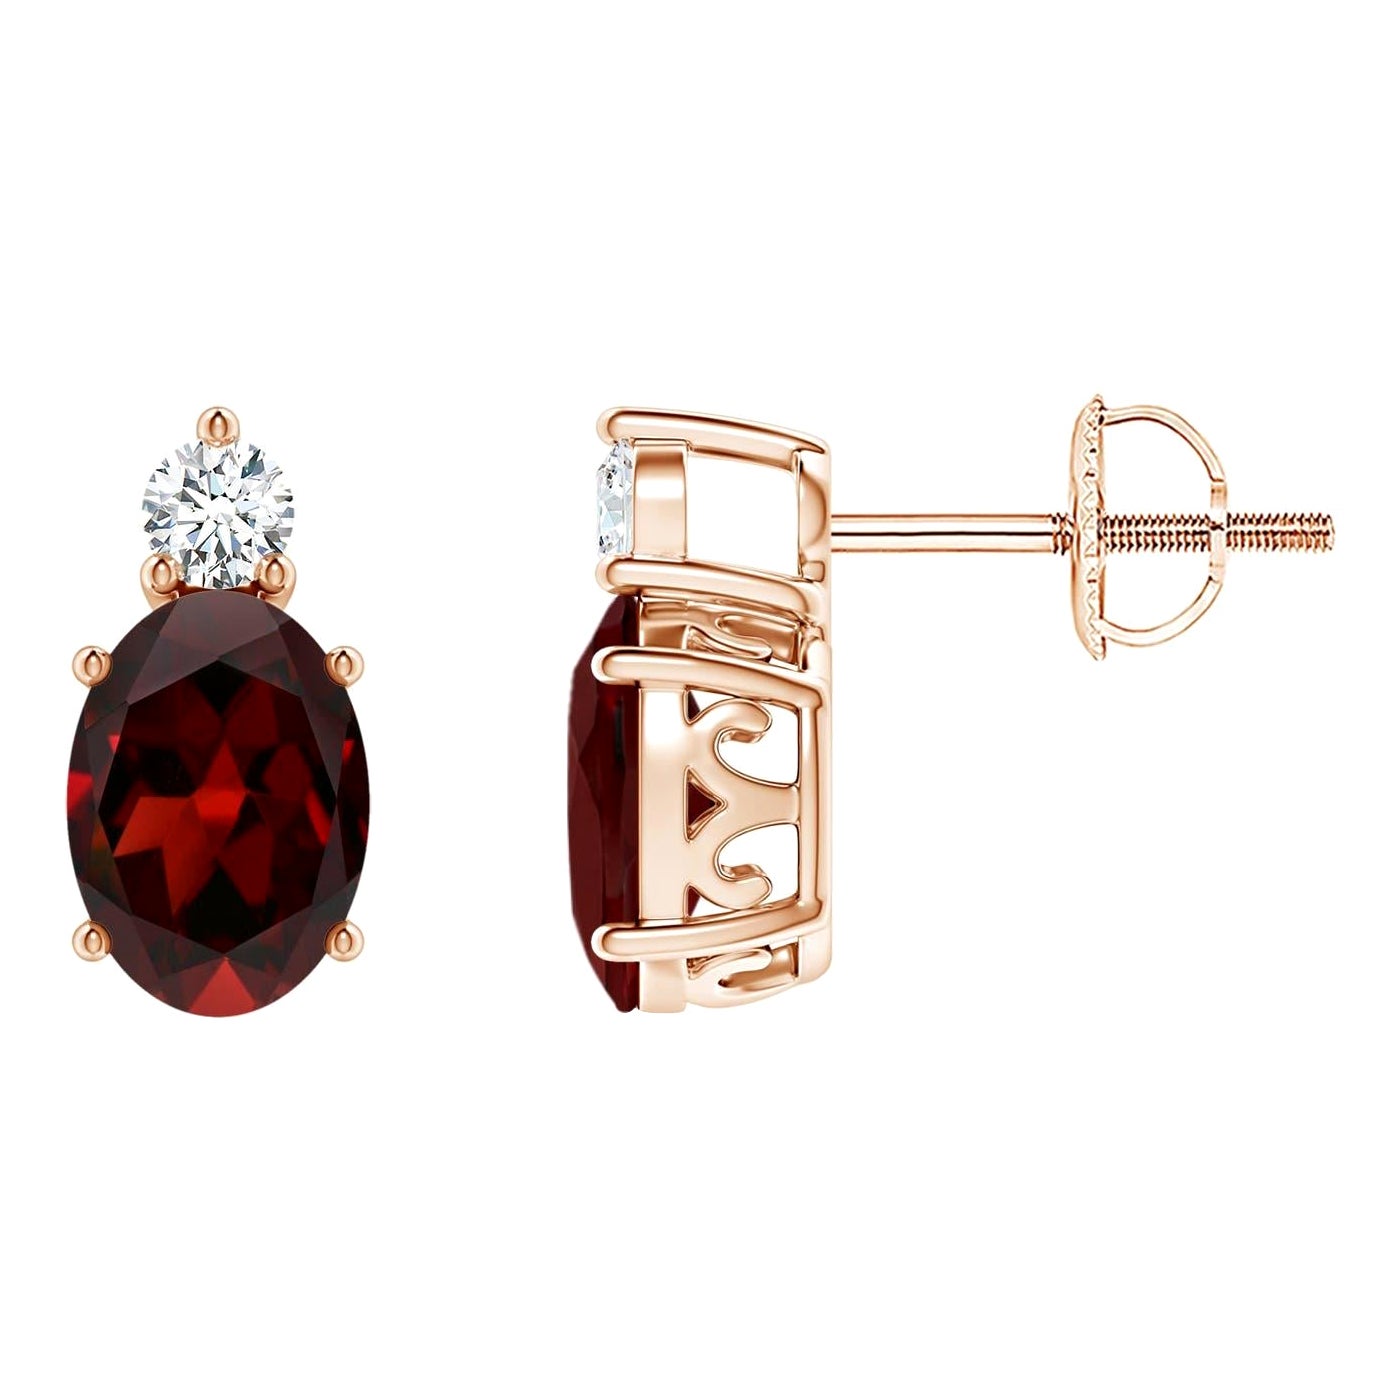 Natural Oval 1.8ct Garnet Stud Earrings w/ Diamond in 14K Rose Gold (Size-7x5mm) For Sale